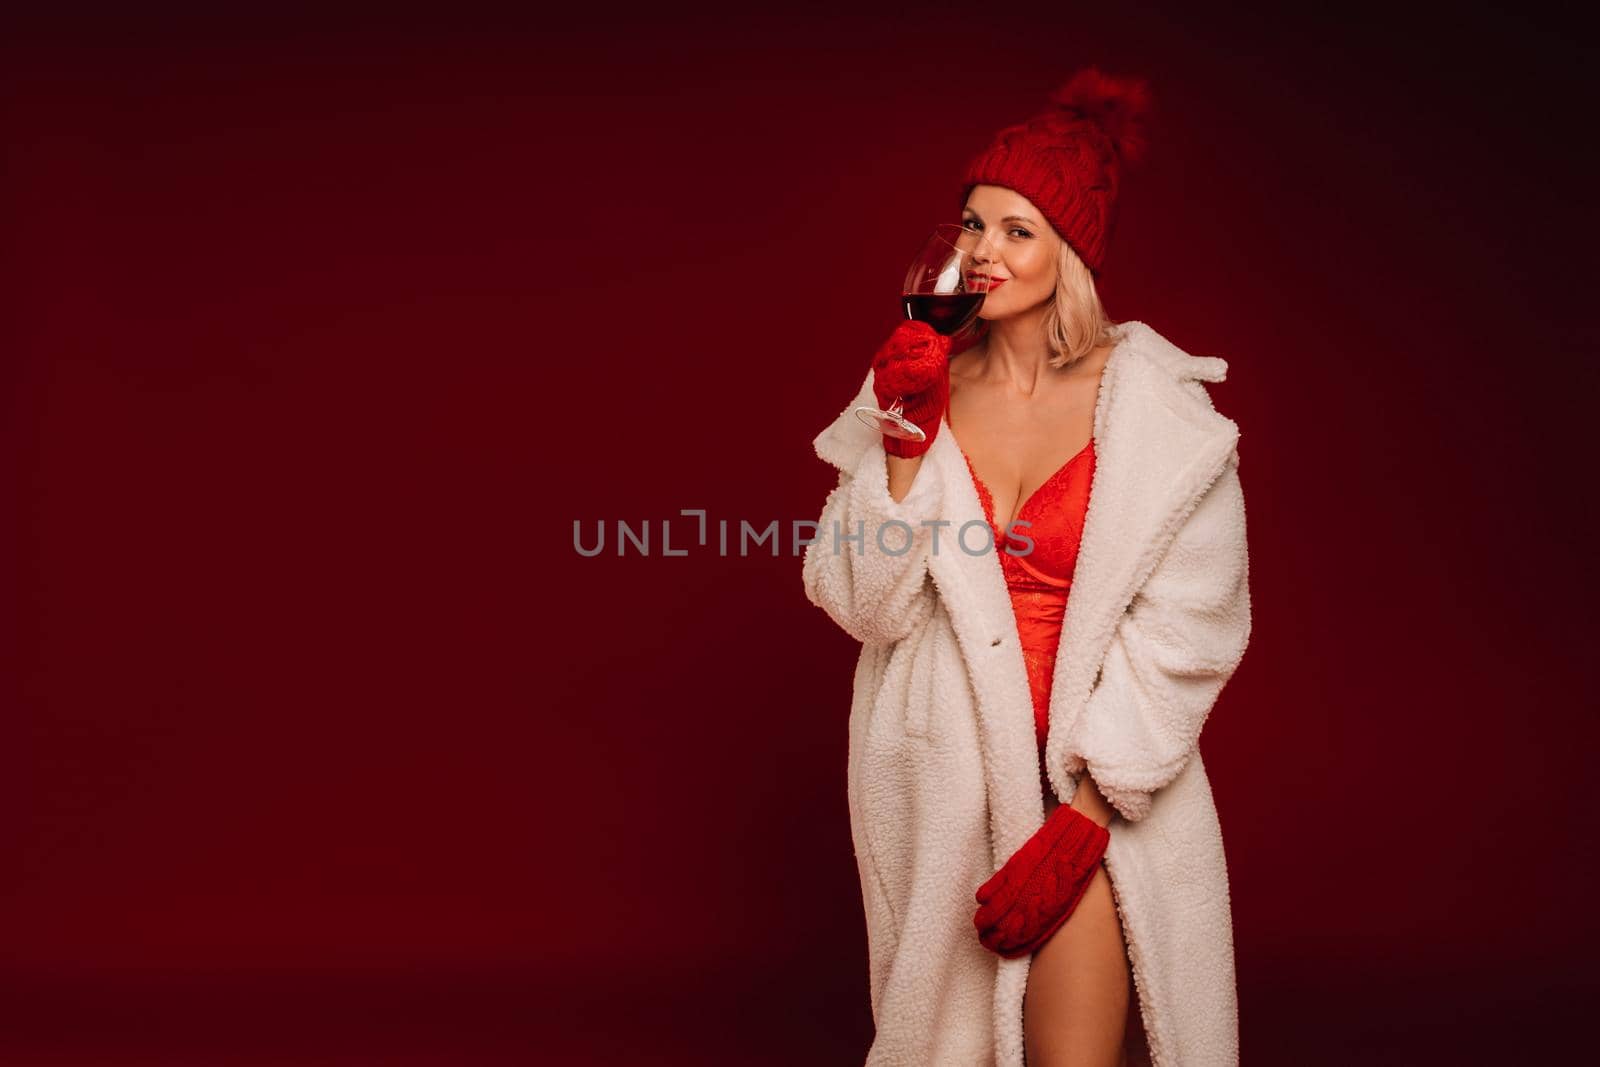 portrait of a smiling girl in a white fur coat and underwear holding a glass of champagne on a red background by Lobachad